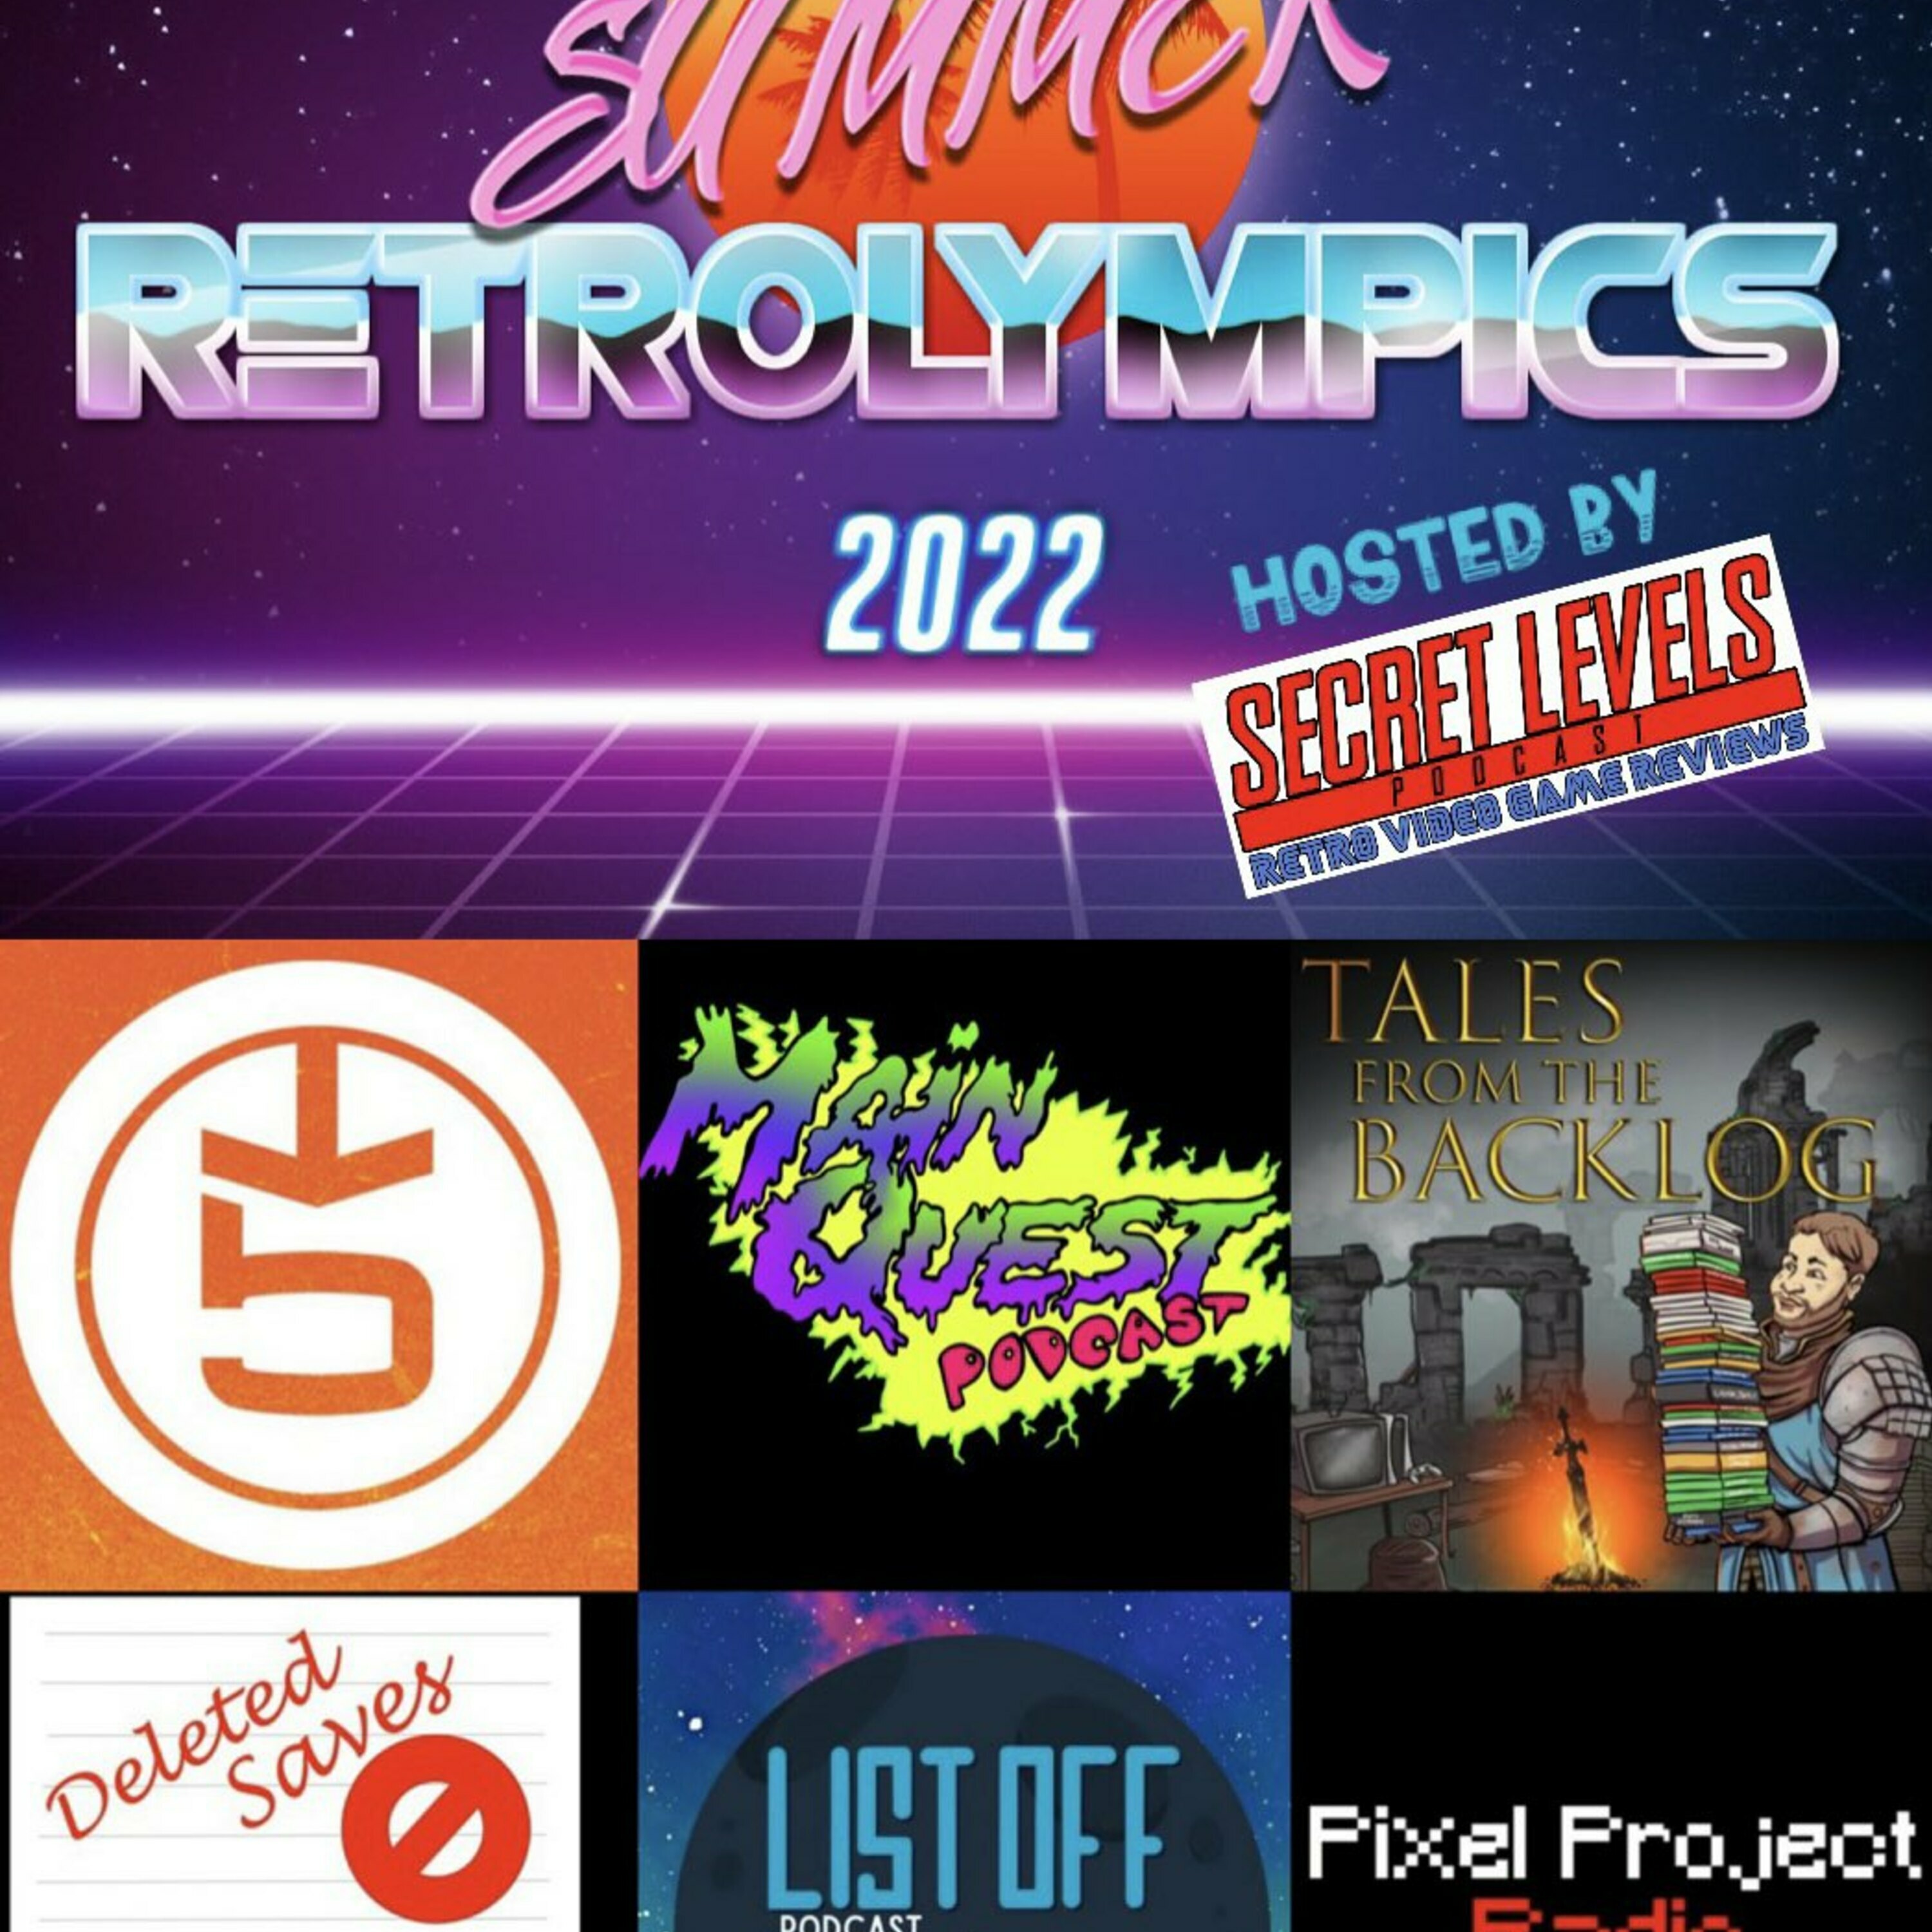 2022 Summer Retrolympics! (Hosted by Secret Levels podcast)